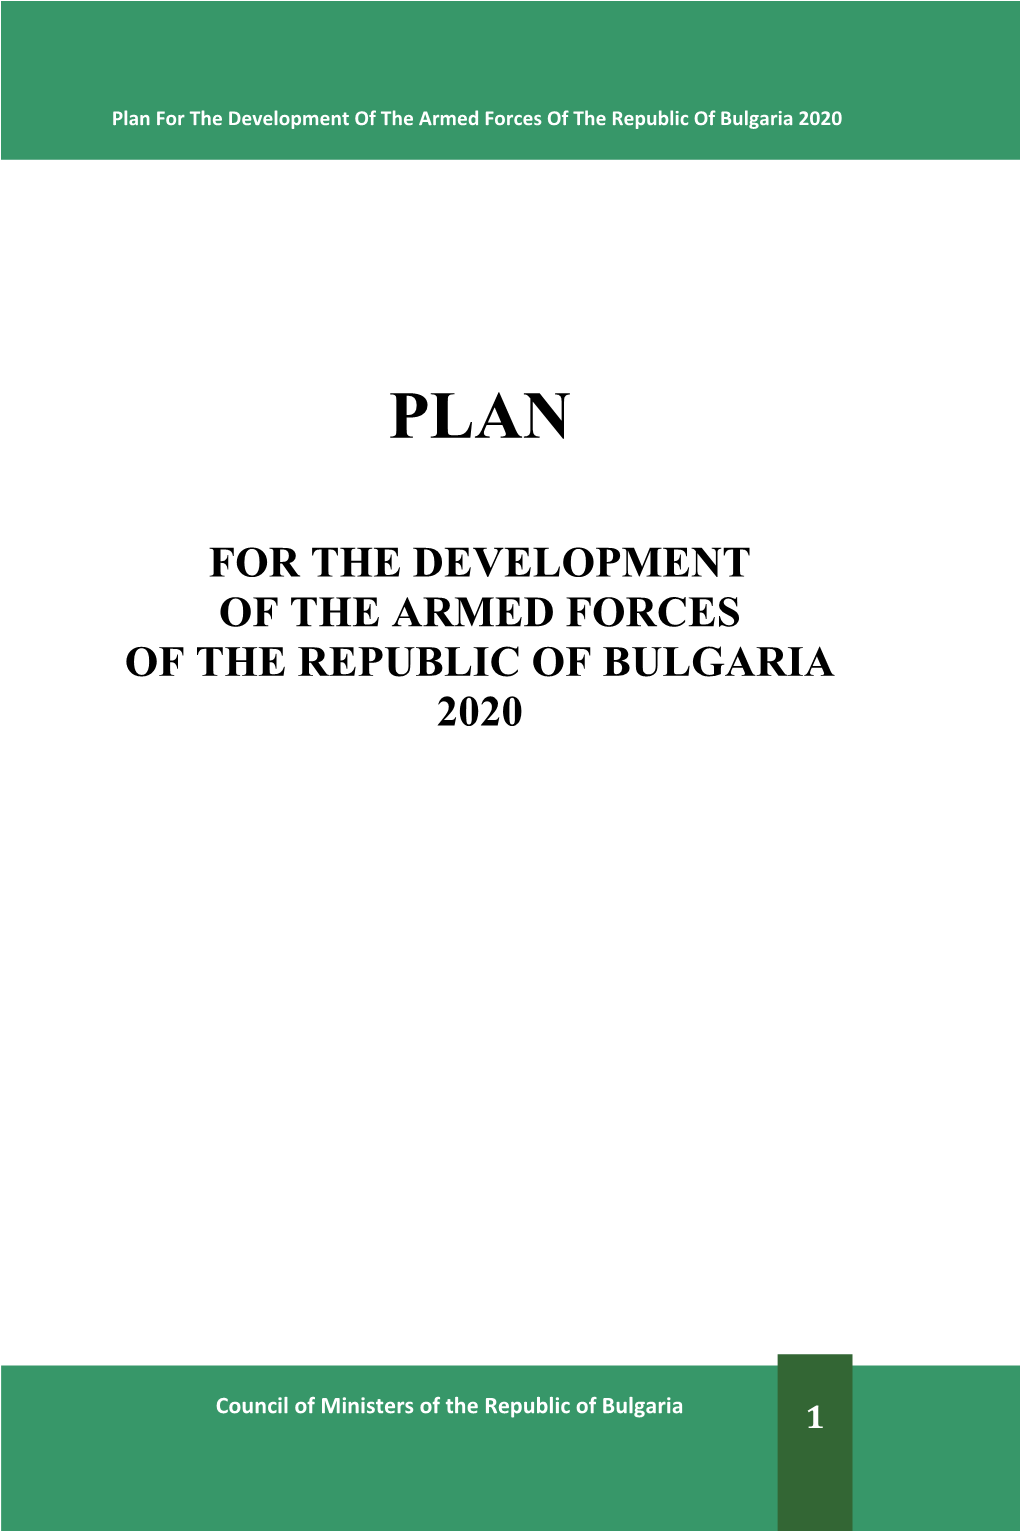 For the Development of the Armed Forces of the Republic of Bulgaria 2020